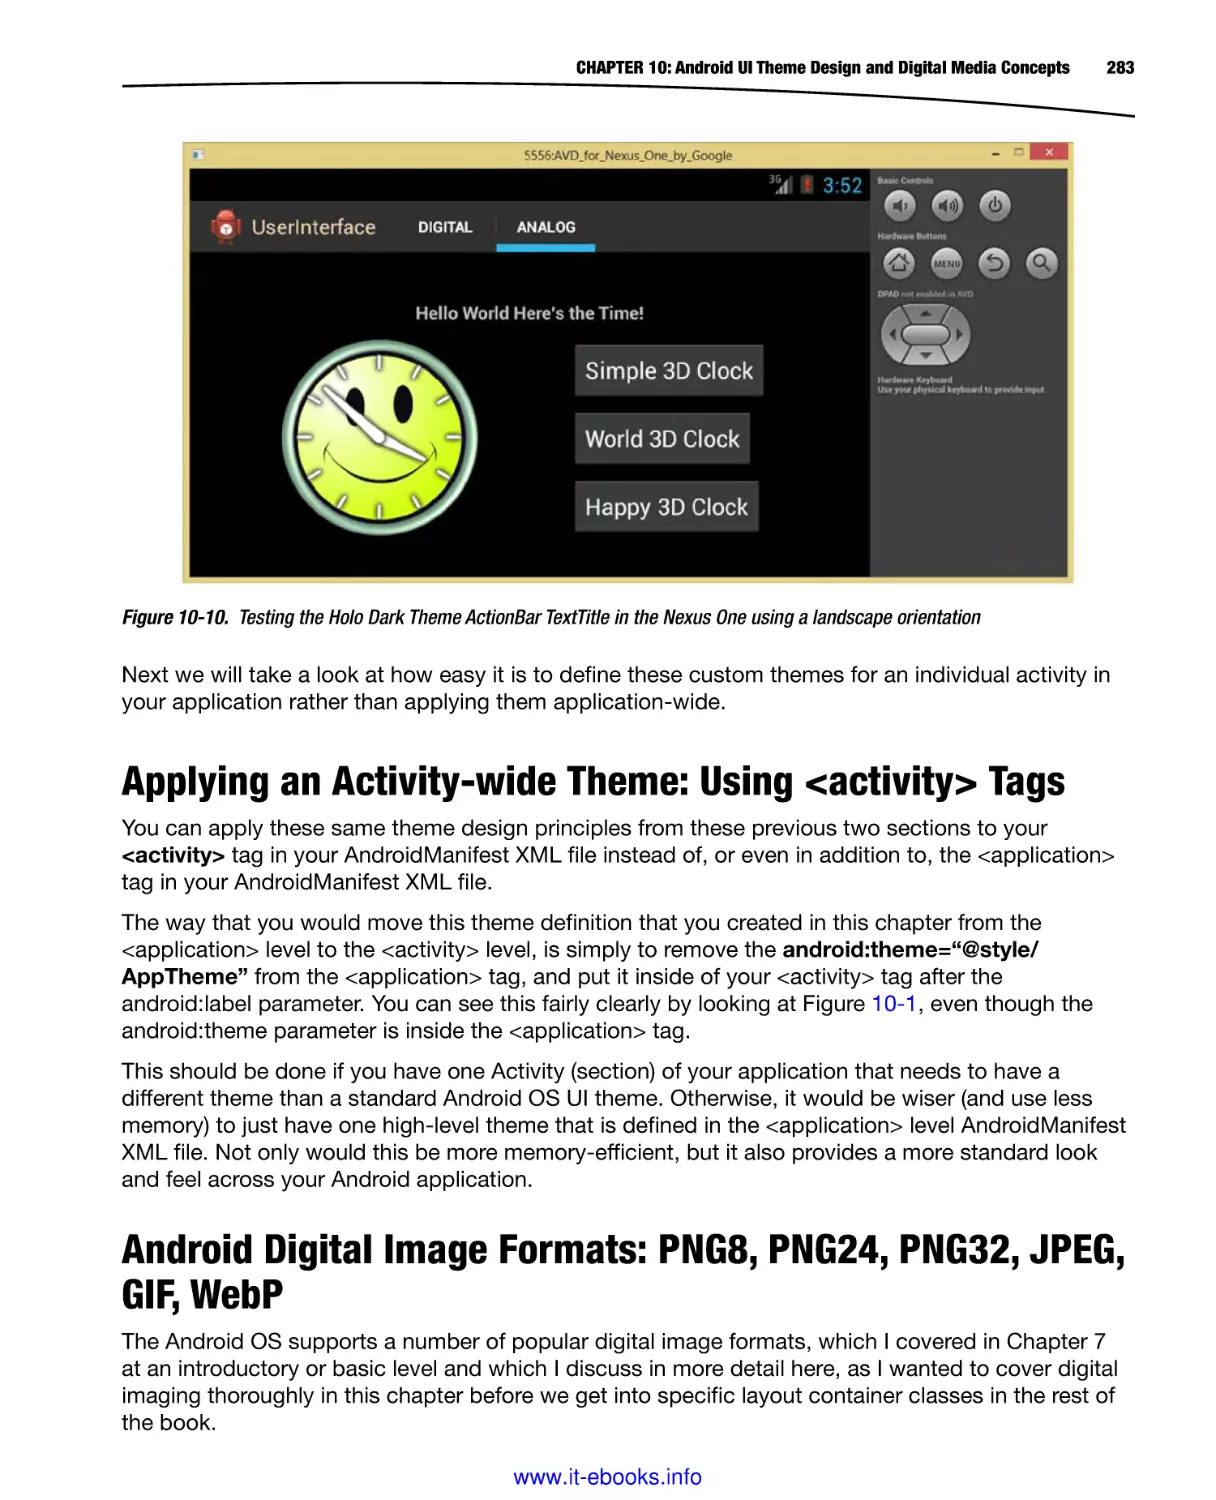 Applying an Activity-wide Theme
Android Digital Image Formats